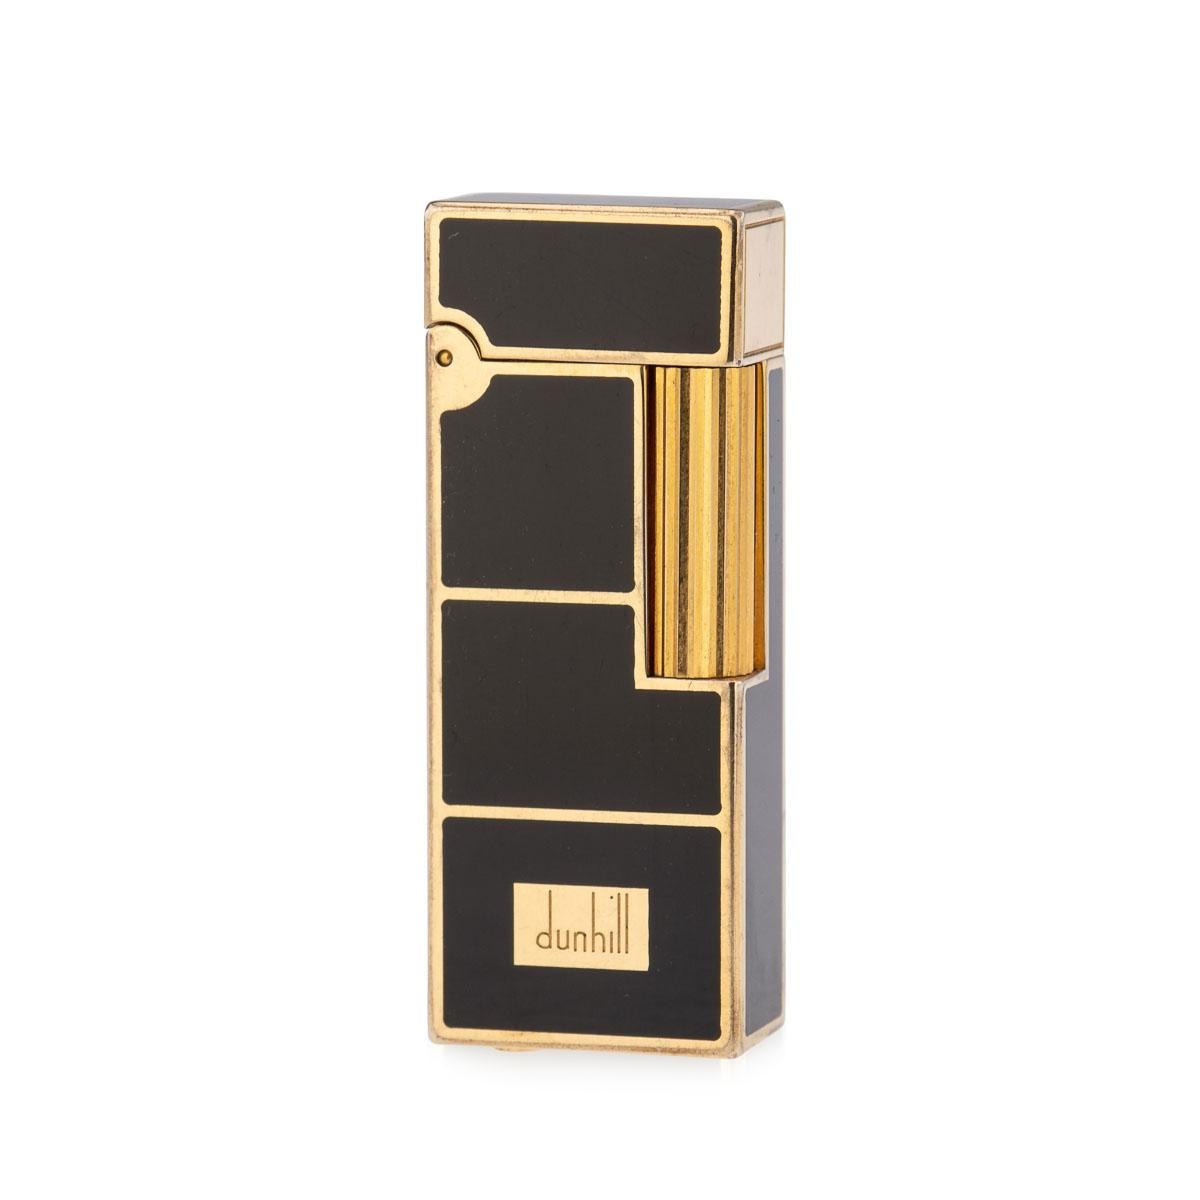 A beautiful brass and black enamel pocket lighter made by Dunhill, England, towards the later end of the 20th century. Presented with its original box and, unusually, even the original cardboard box, hardly ever seen as they are usually discarded,